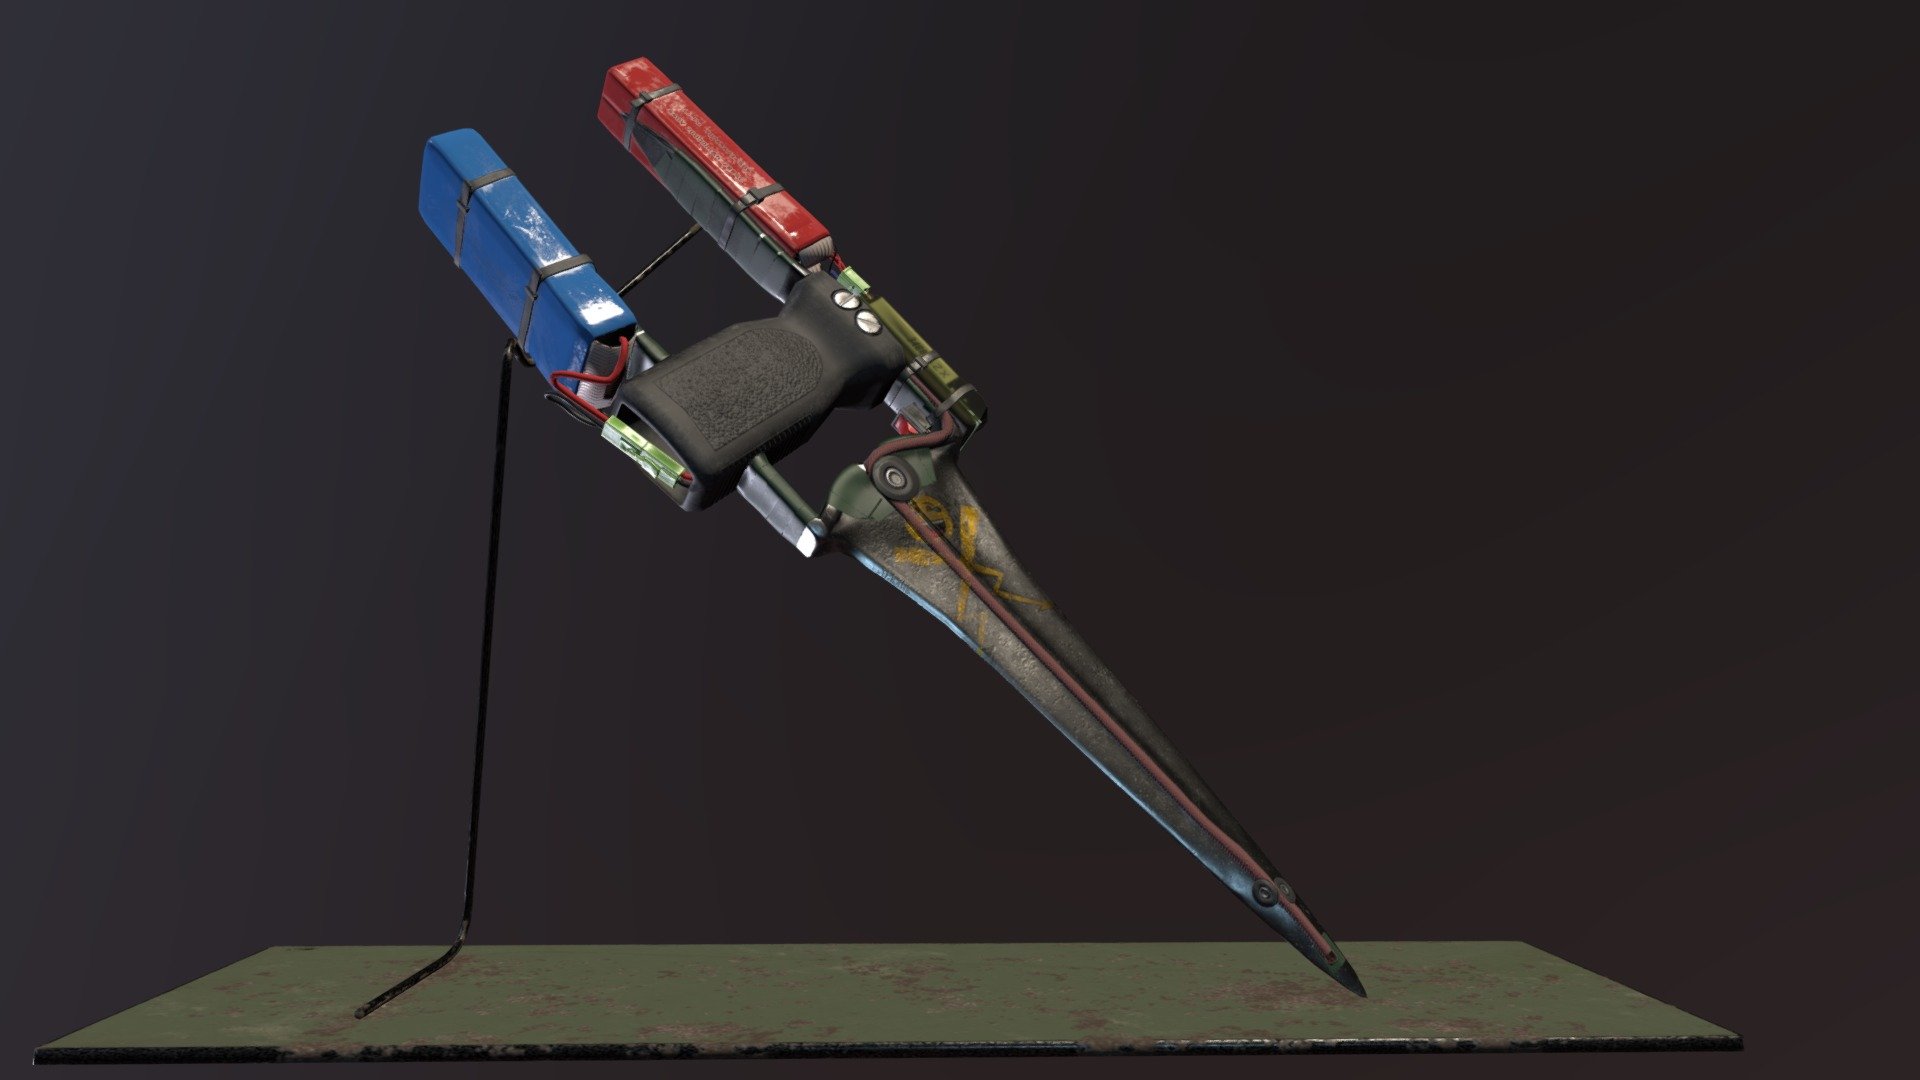 concept of improvised close combat weapon based on traditional hindu dagger with an electric circut attached on it; - post-apo electro-dagger - 3D model by pawel wardecki (@waderian) 3d model